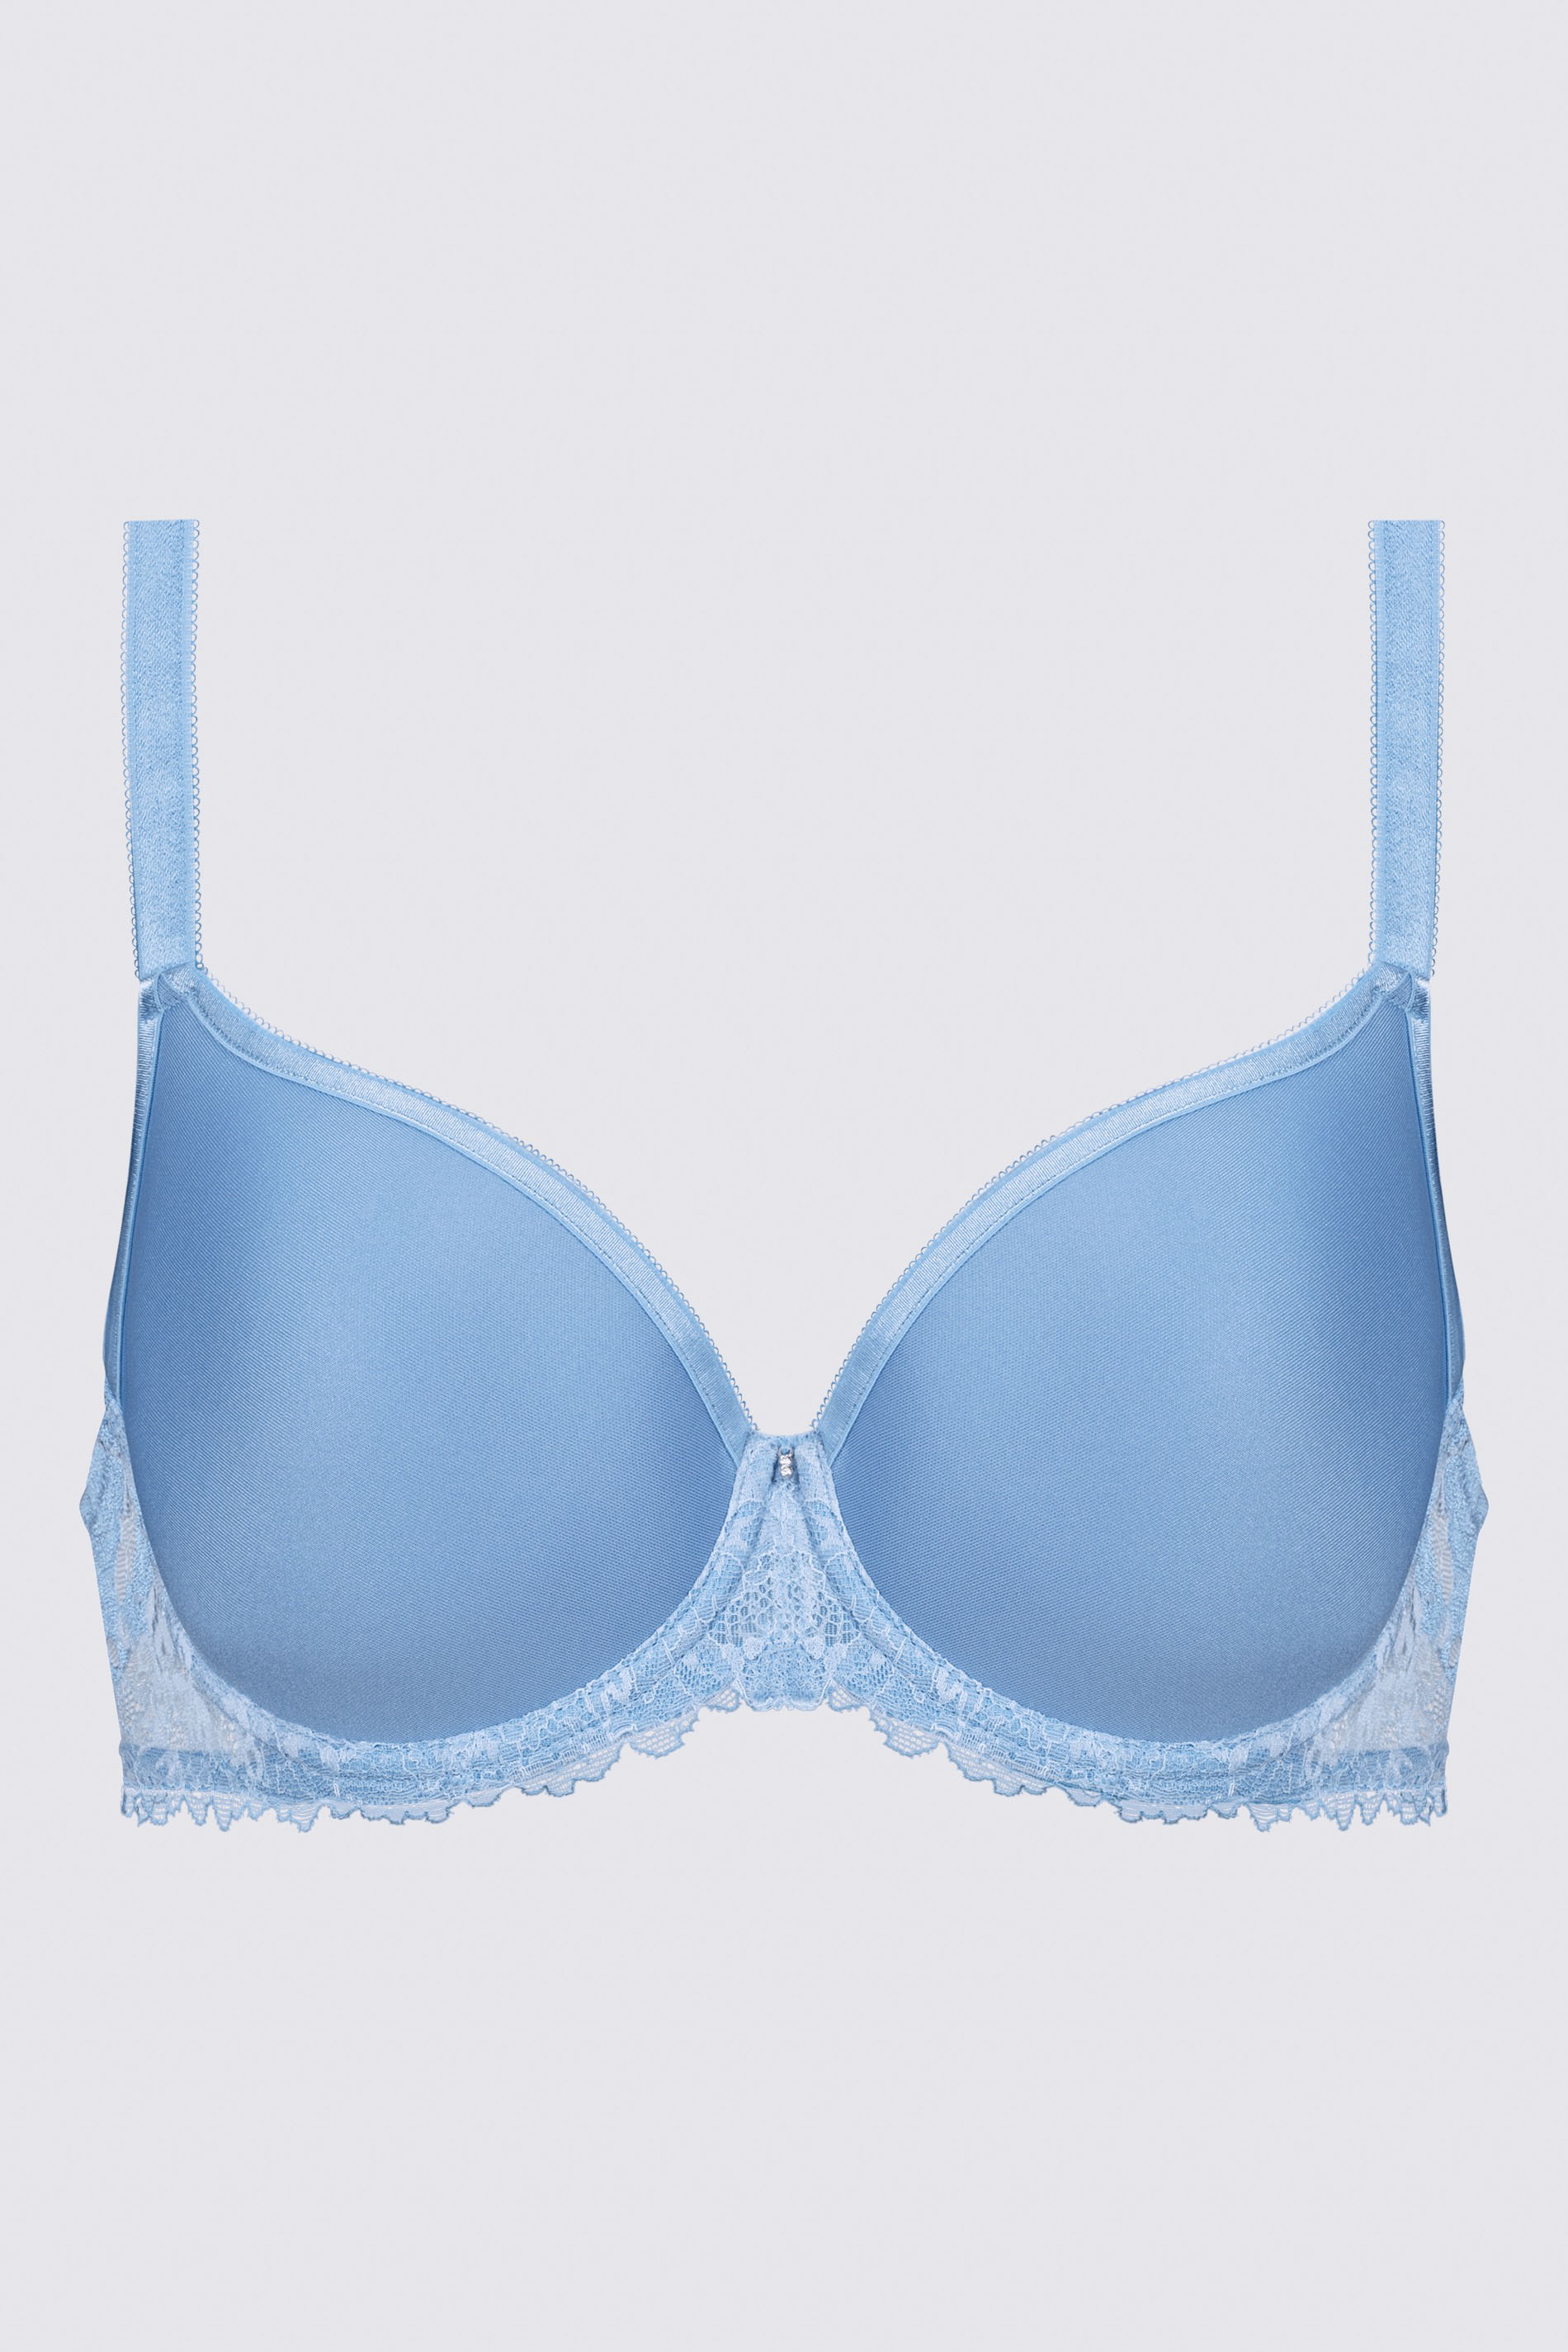 Spacer bra | Full Cup Serie Luxurious Cut Out | mey®